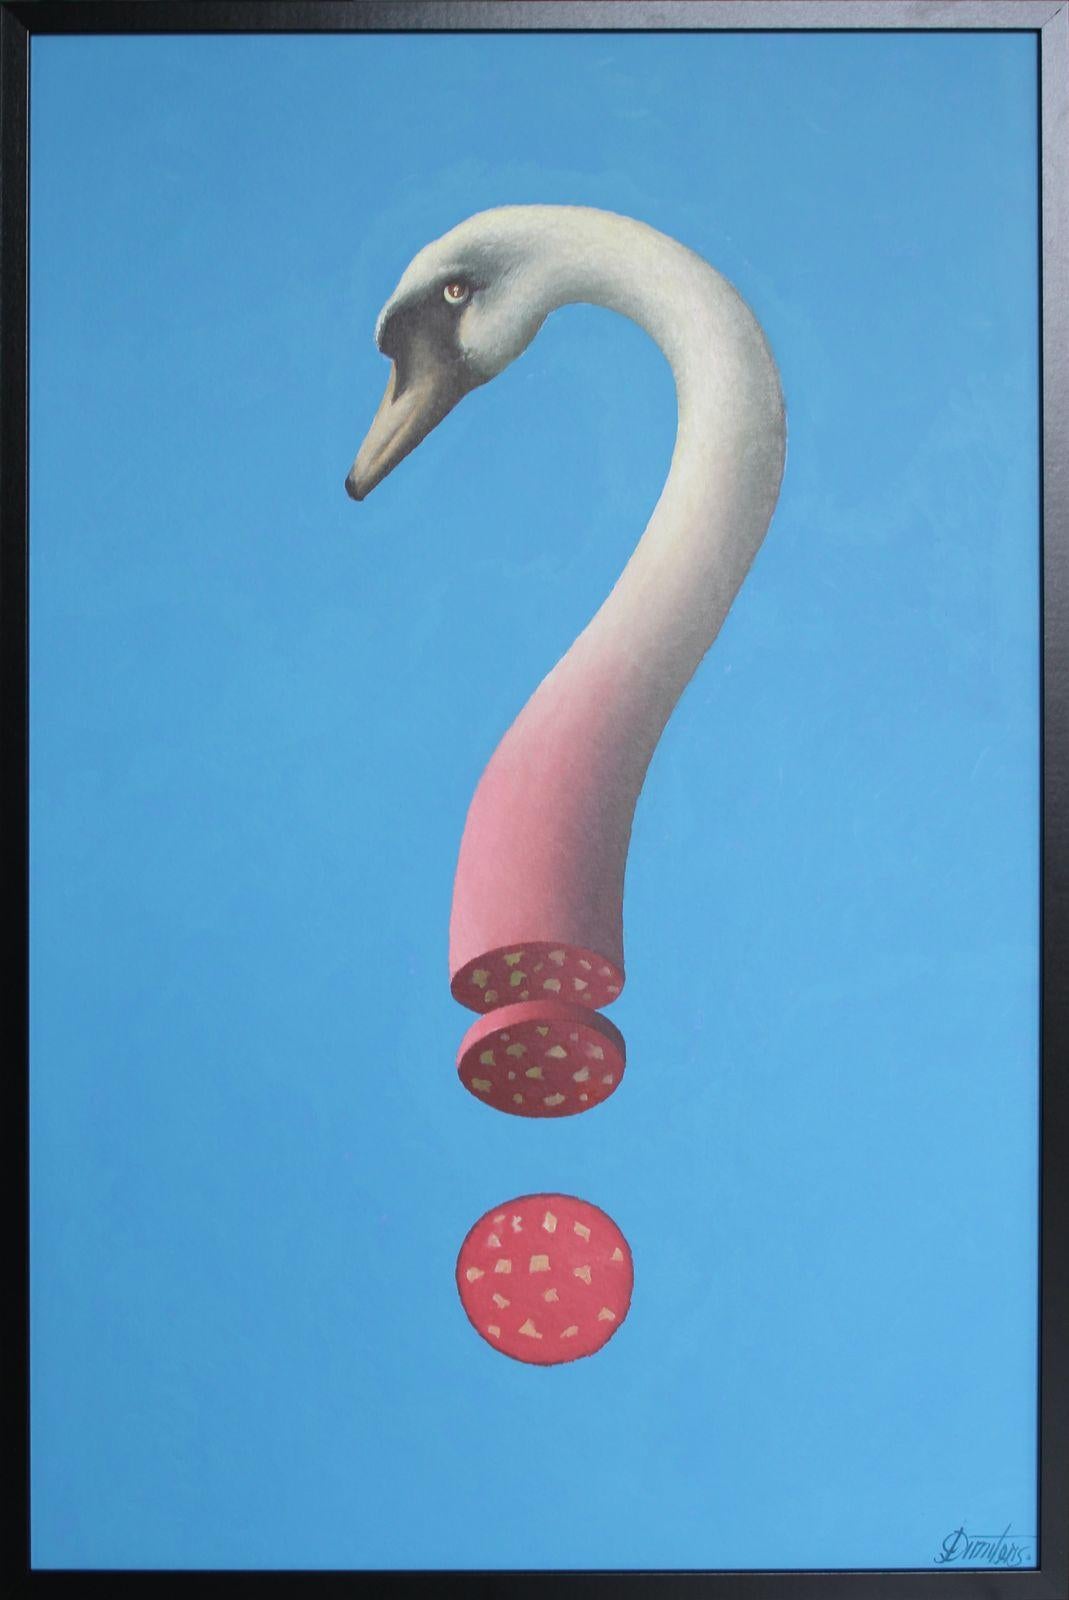 Juris Dimiters Animal Painting - The eternal question  carboard, oil, 92x61 cm